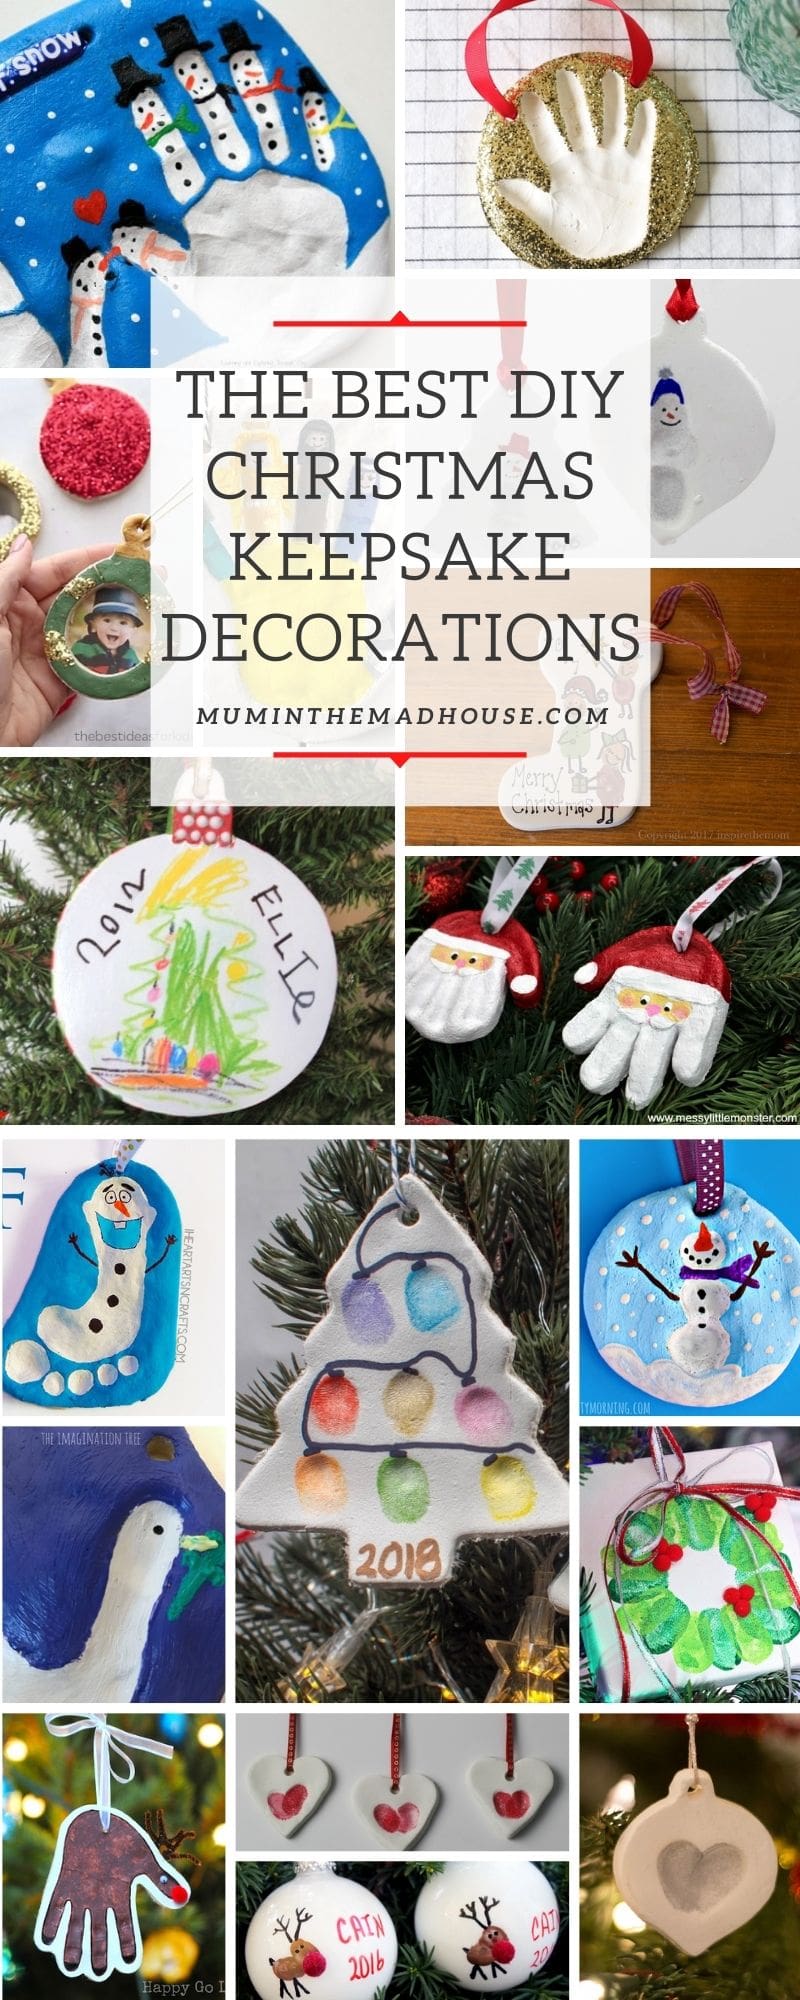 The Best DIY Christmas Keepsake Decorations that your family will cherish for years to come. These craft ornaments are beautiful and meaningful.